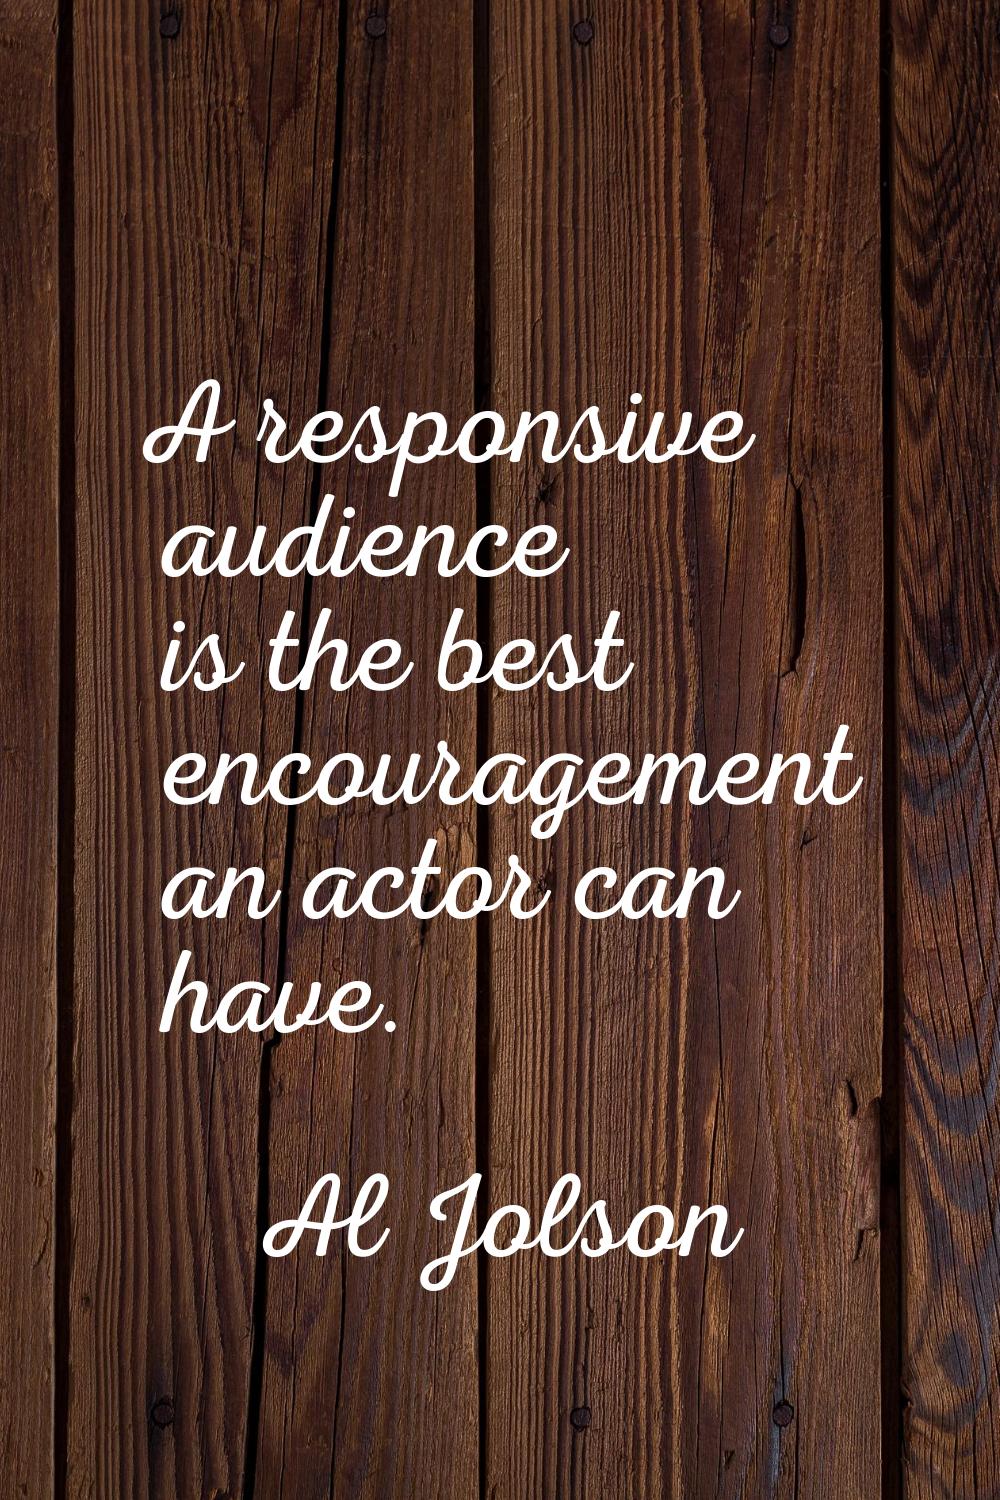 A responsive audience is the best encouragement an actor can have.